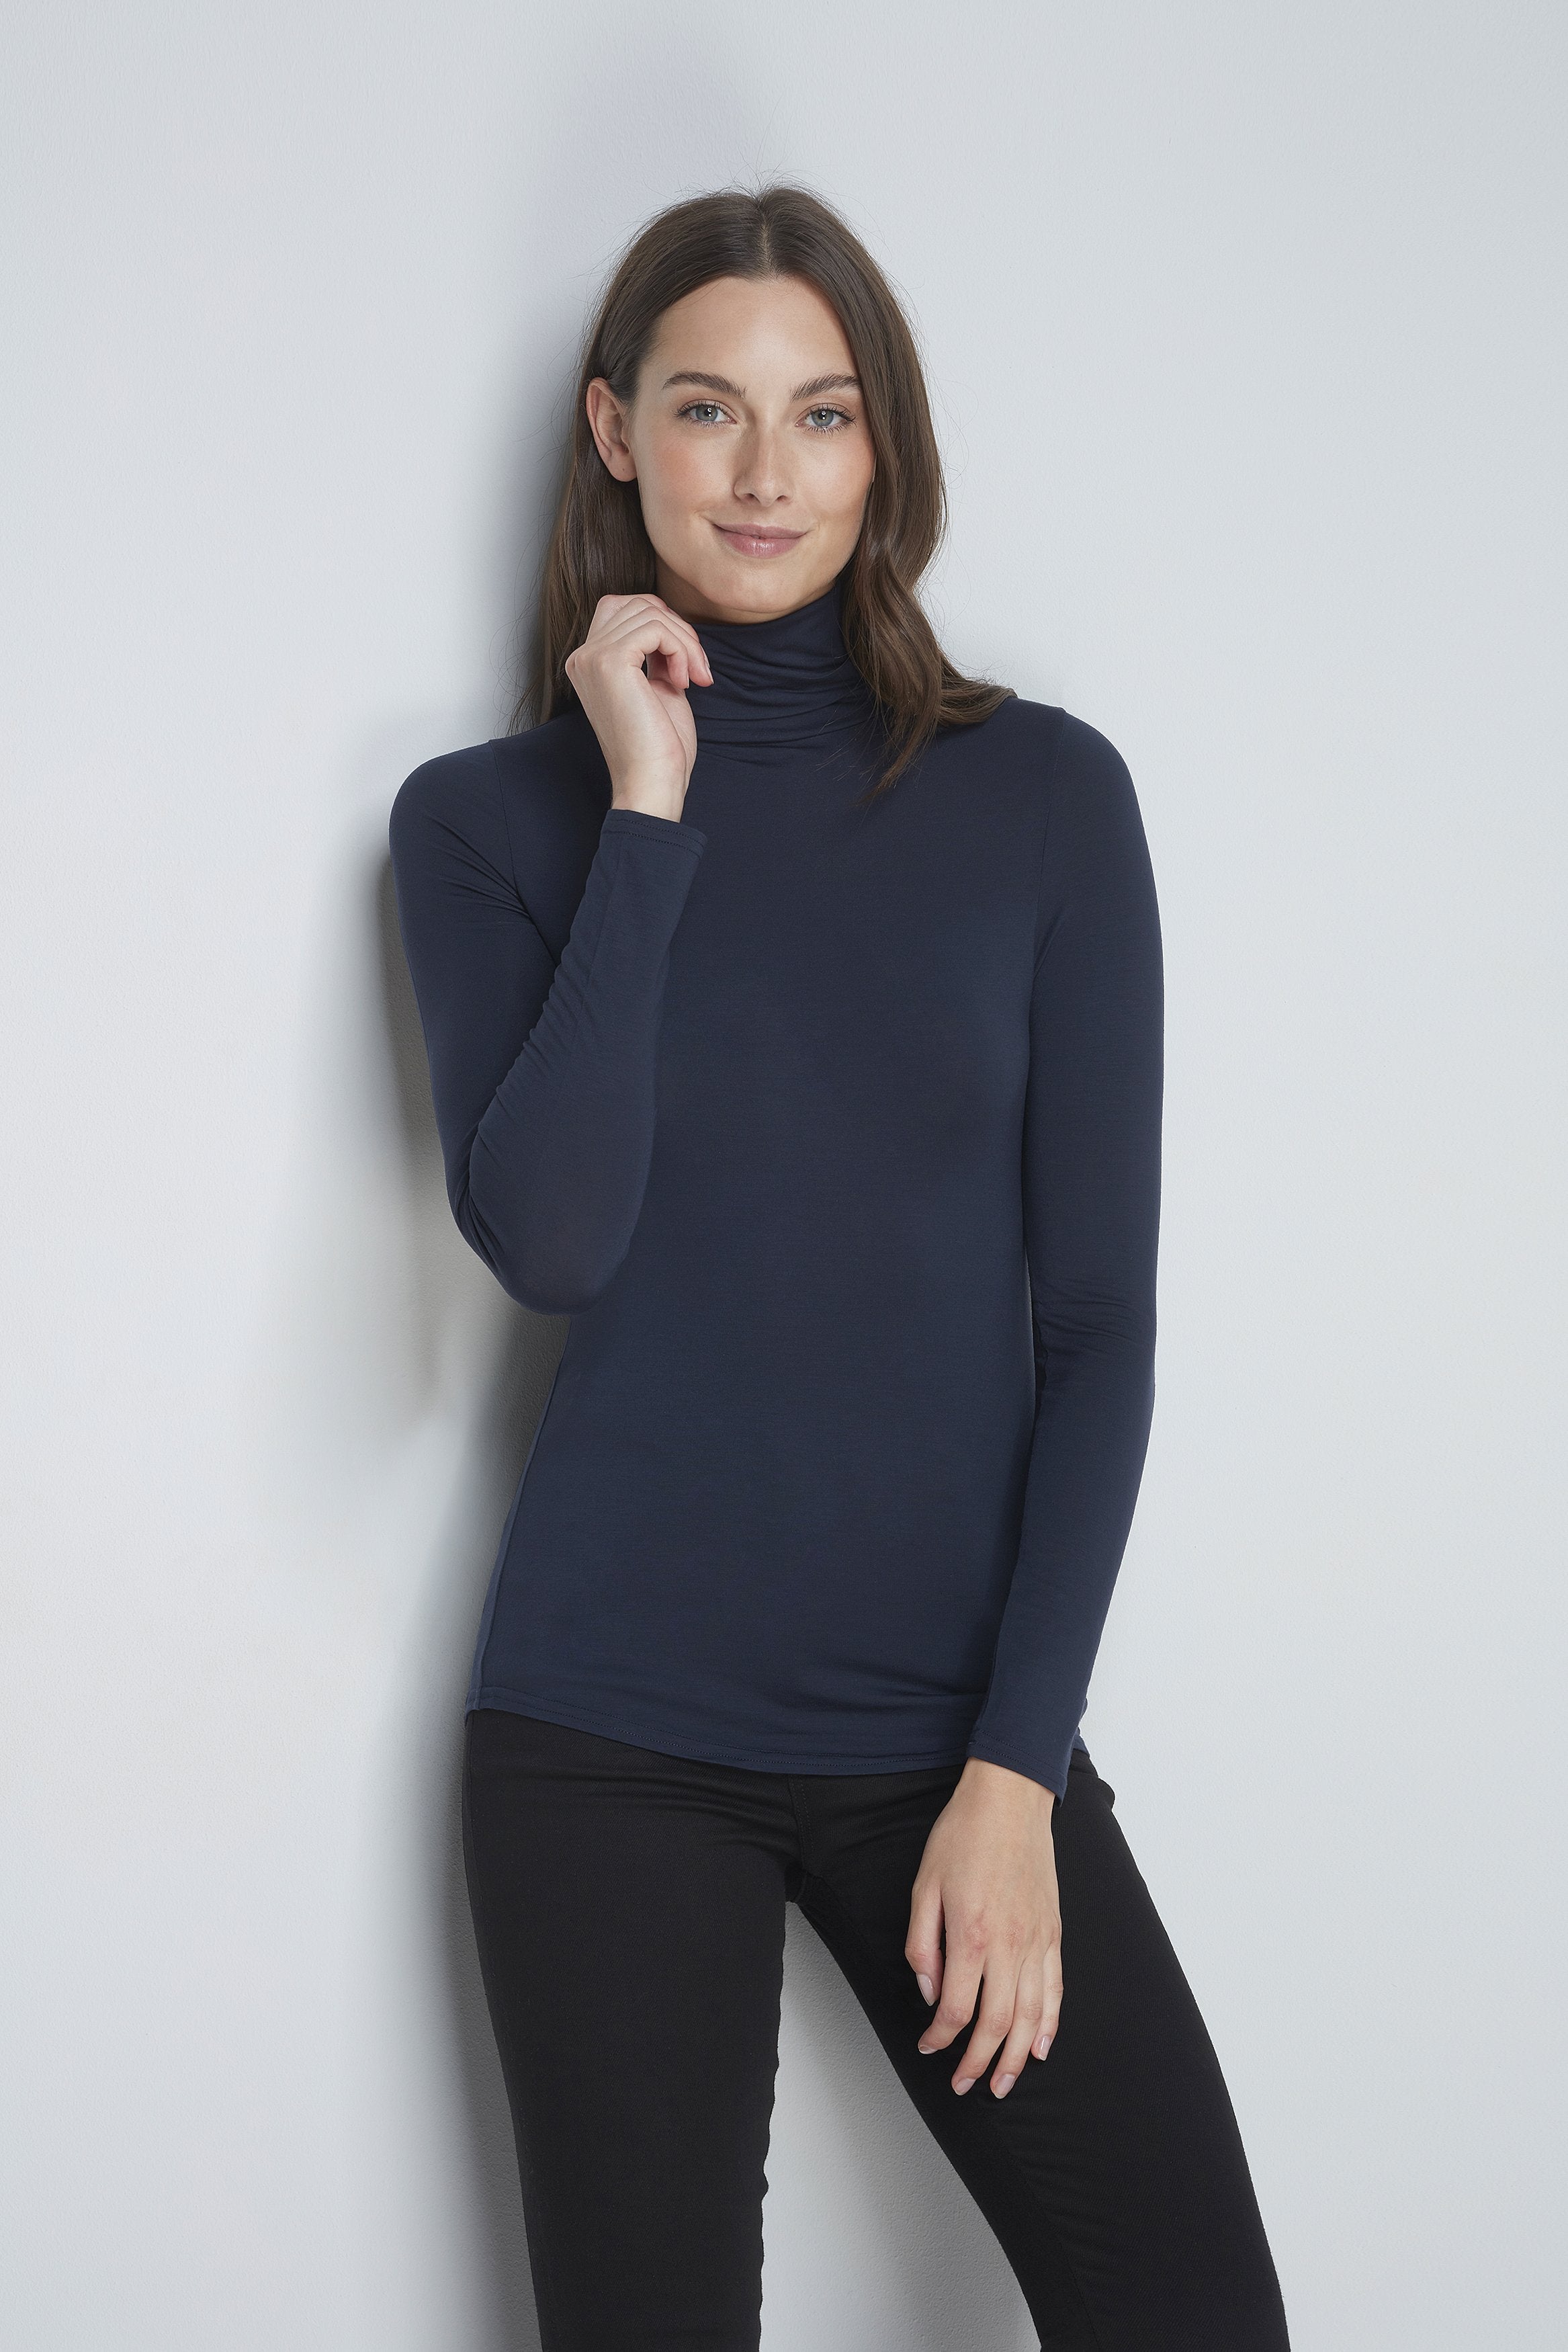 Women's Polo Neck Shirts and Roll Neck Tops | Lavender Hill Clothing